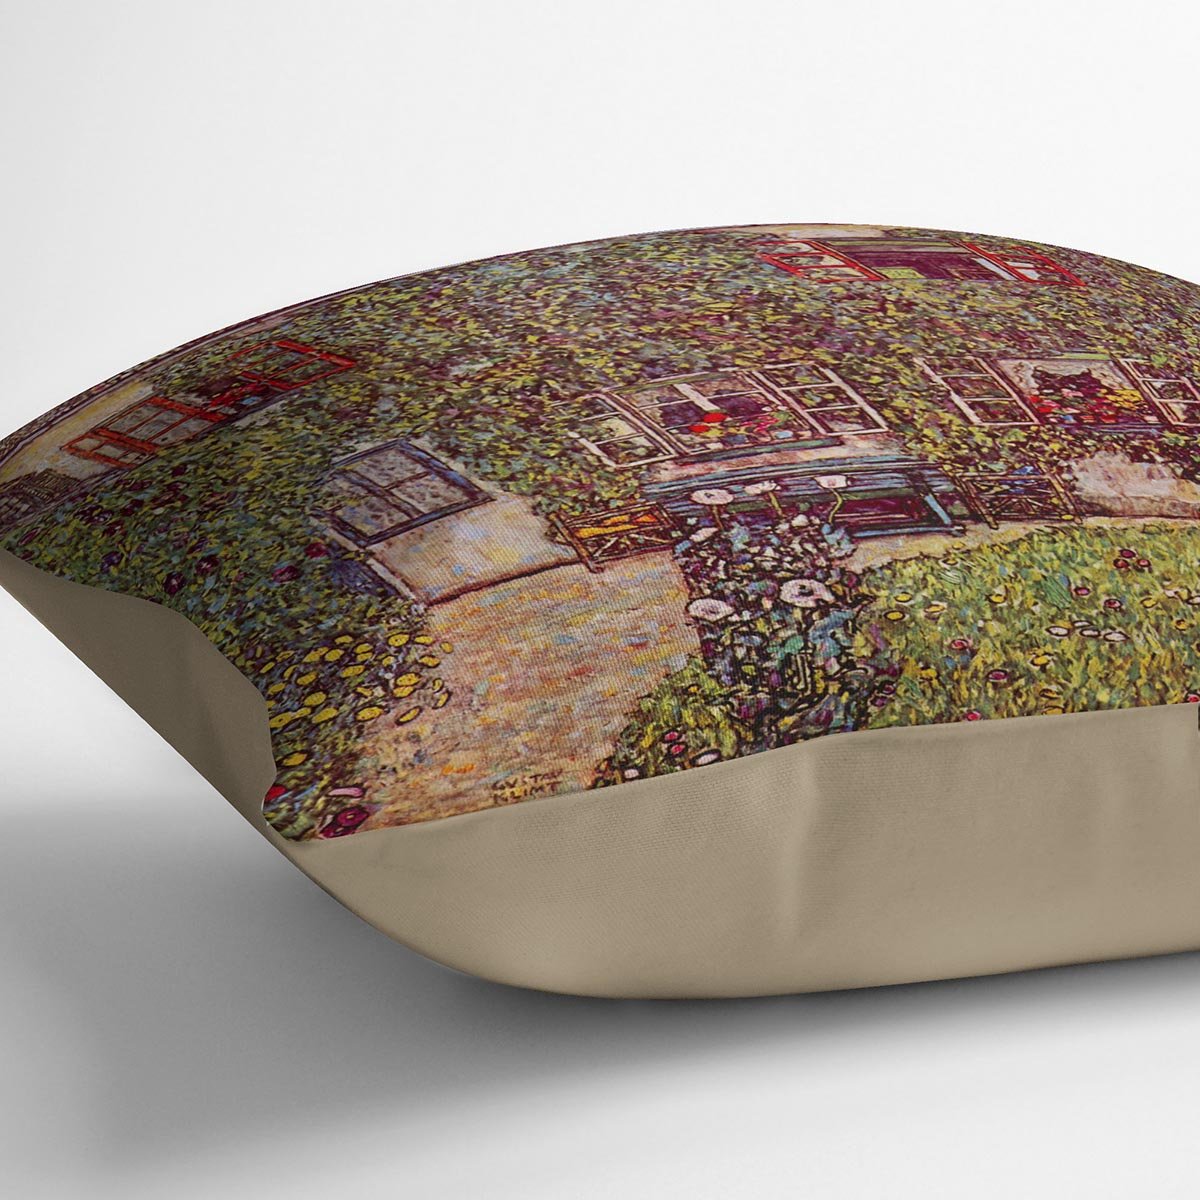 The House of Guard by Klimt Throw Pillow